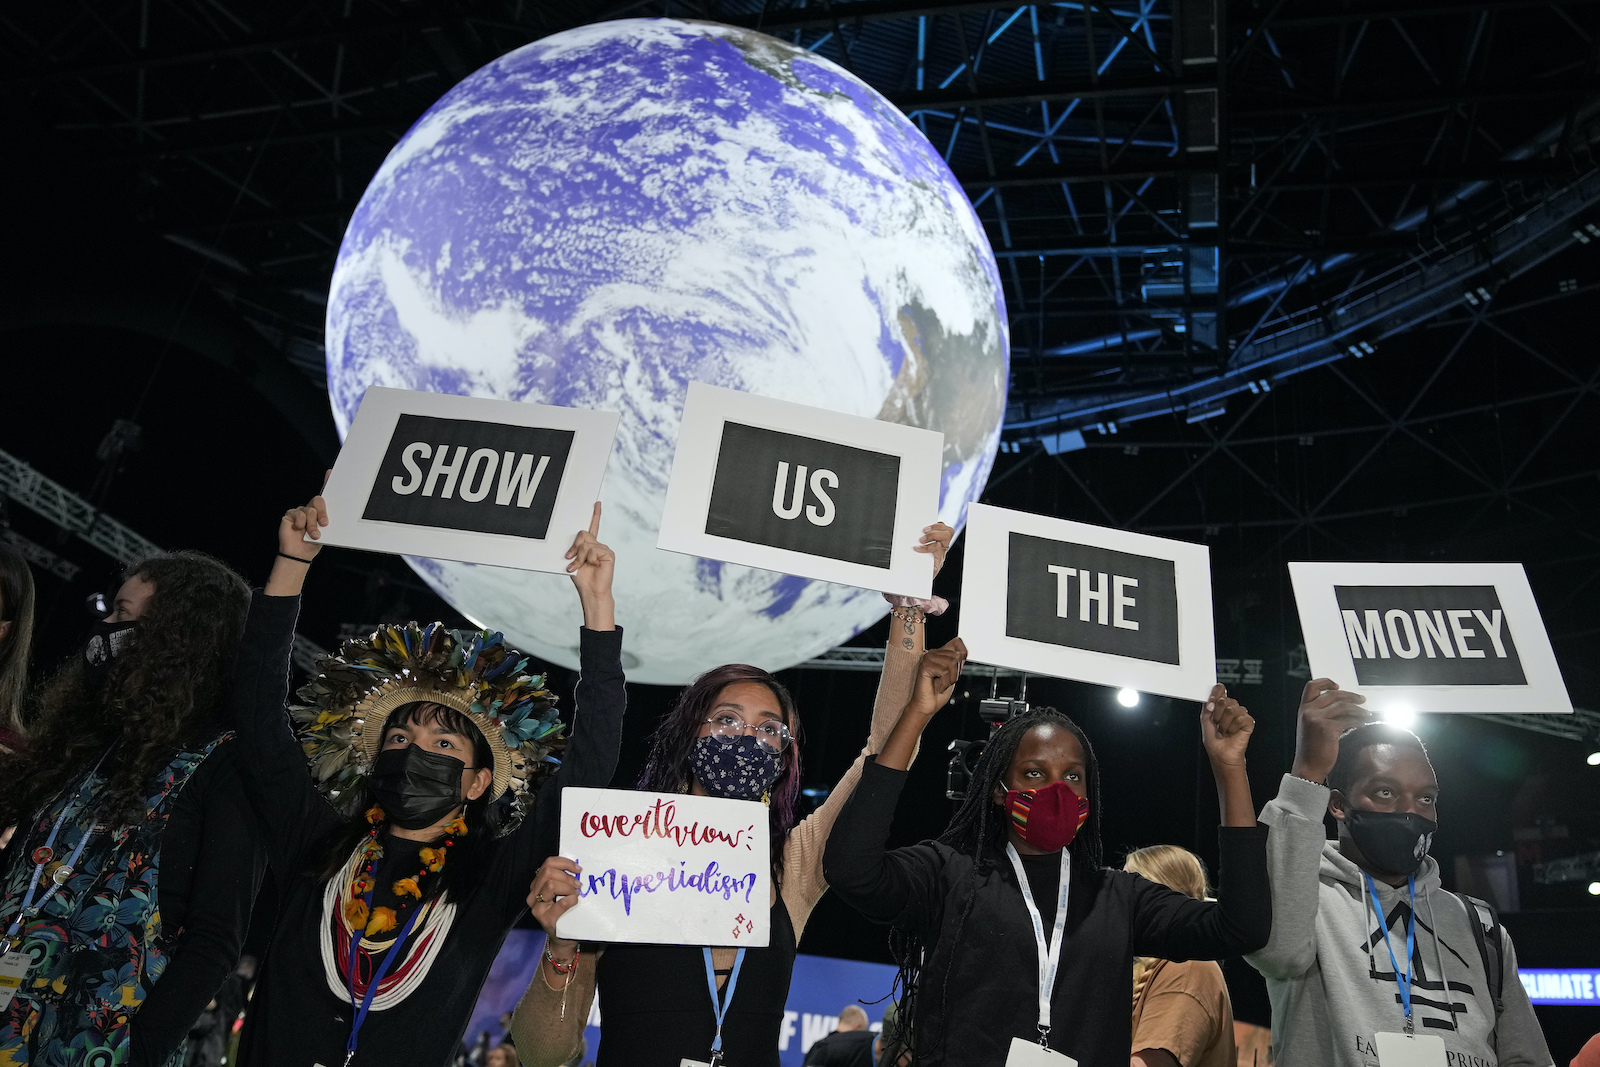 a group of people hold signs that say show us the money in front of an image of the earth